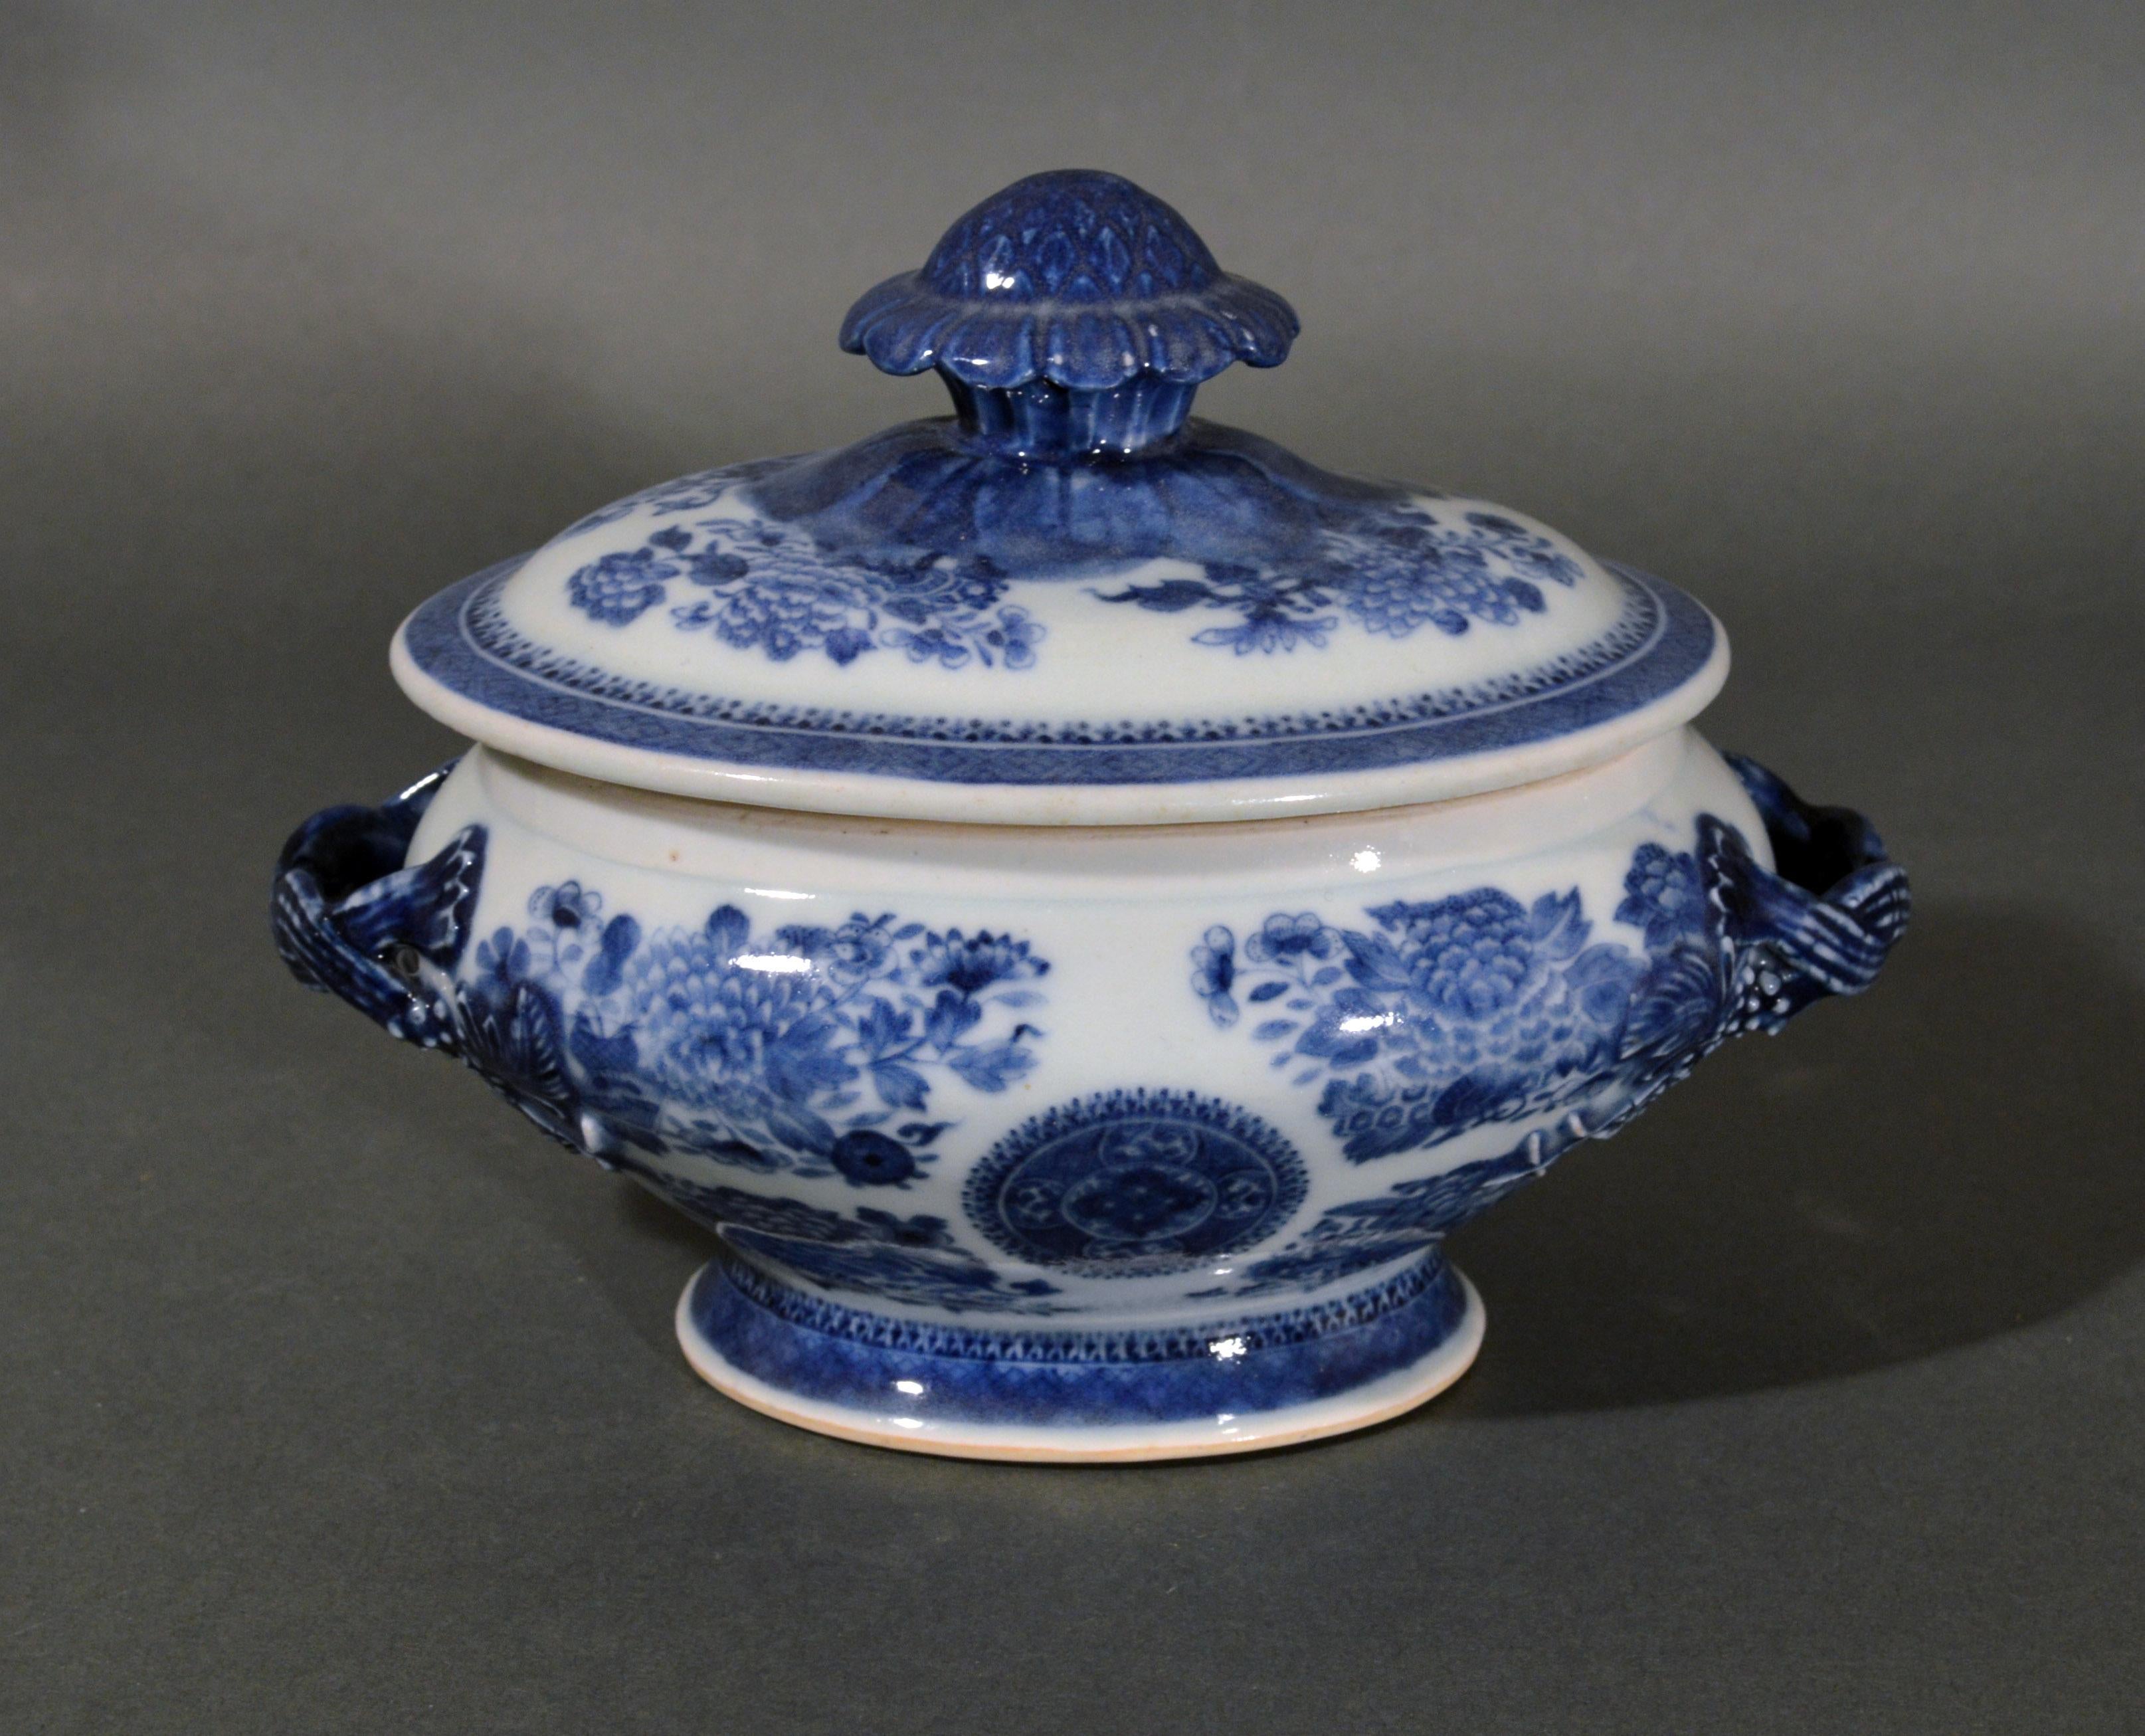 Chinese Export Porcelain Blue Fitzhugh Sauce Tureens, Covers & Stands For Sale 3